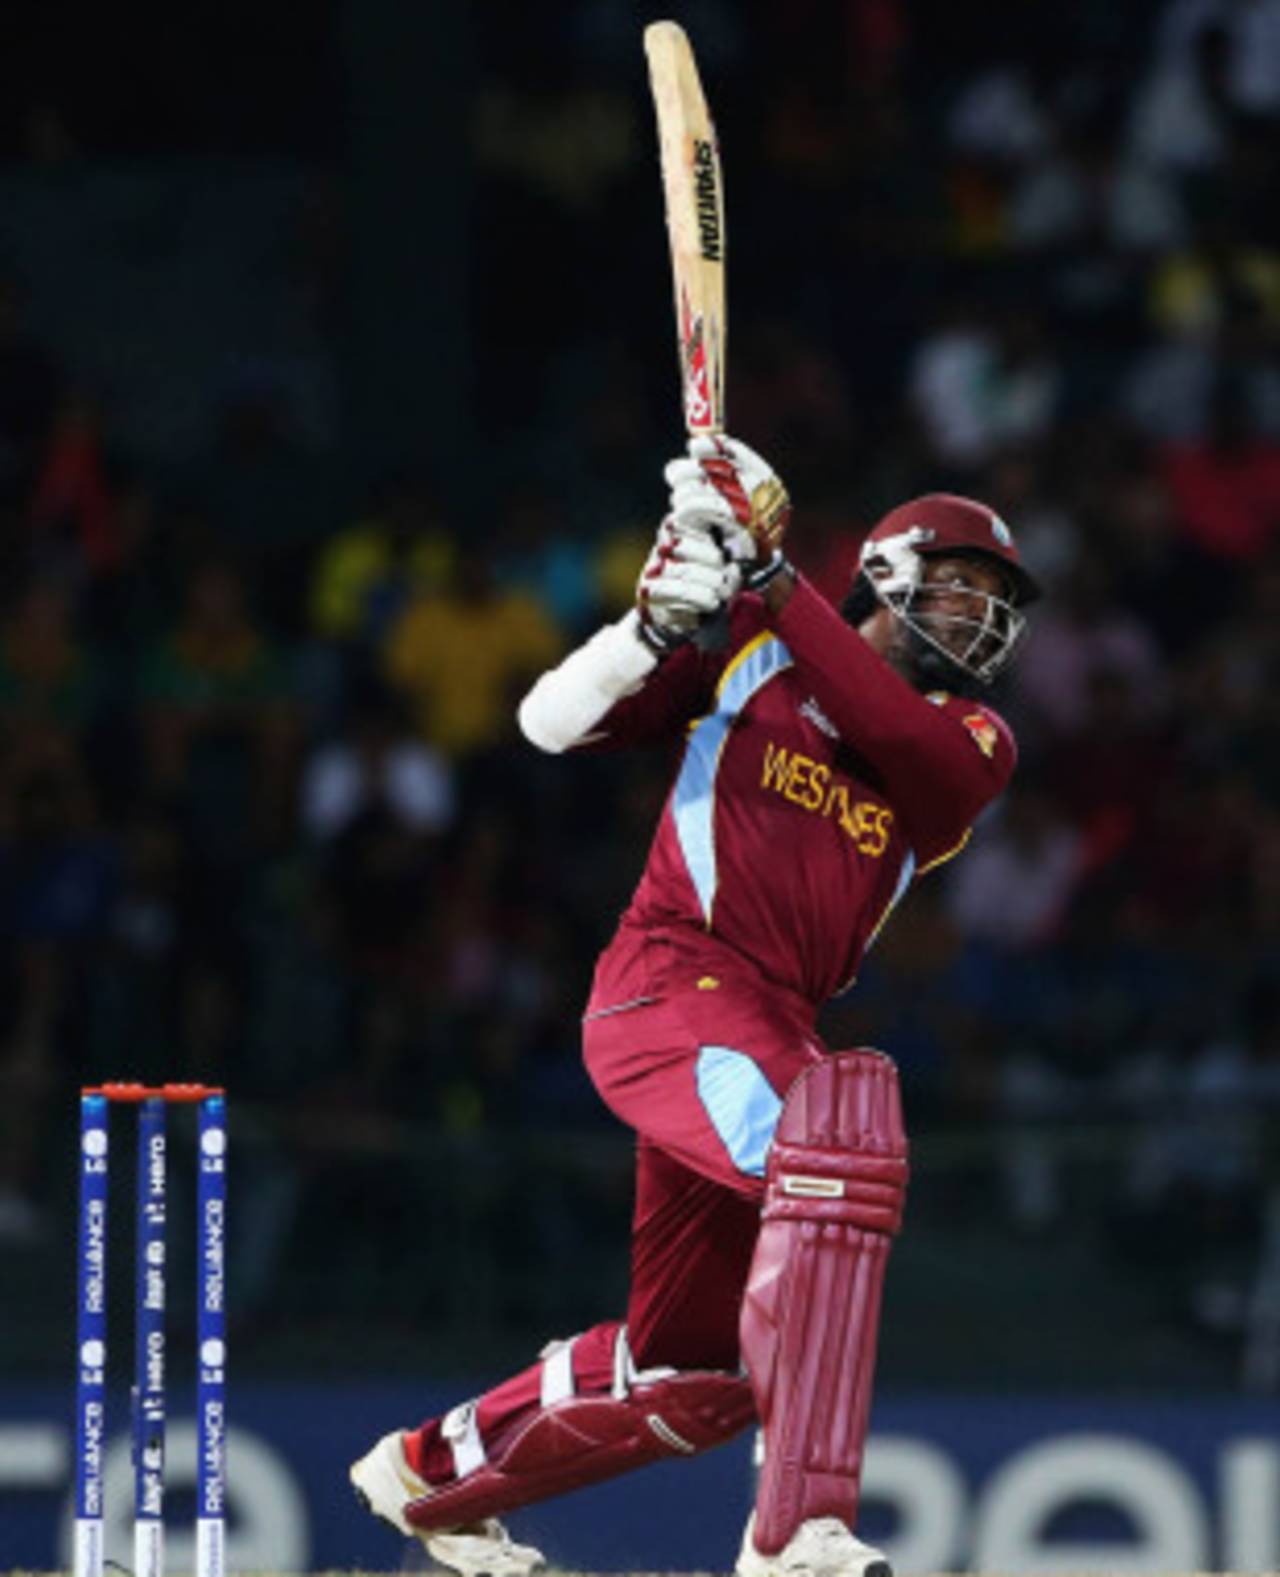 Chris Gayle did not have much strike early in the innings but made up for it later on&nbsp;&nbsp;&bull;&nbsp;&nbsp;ICC/Getty